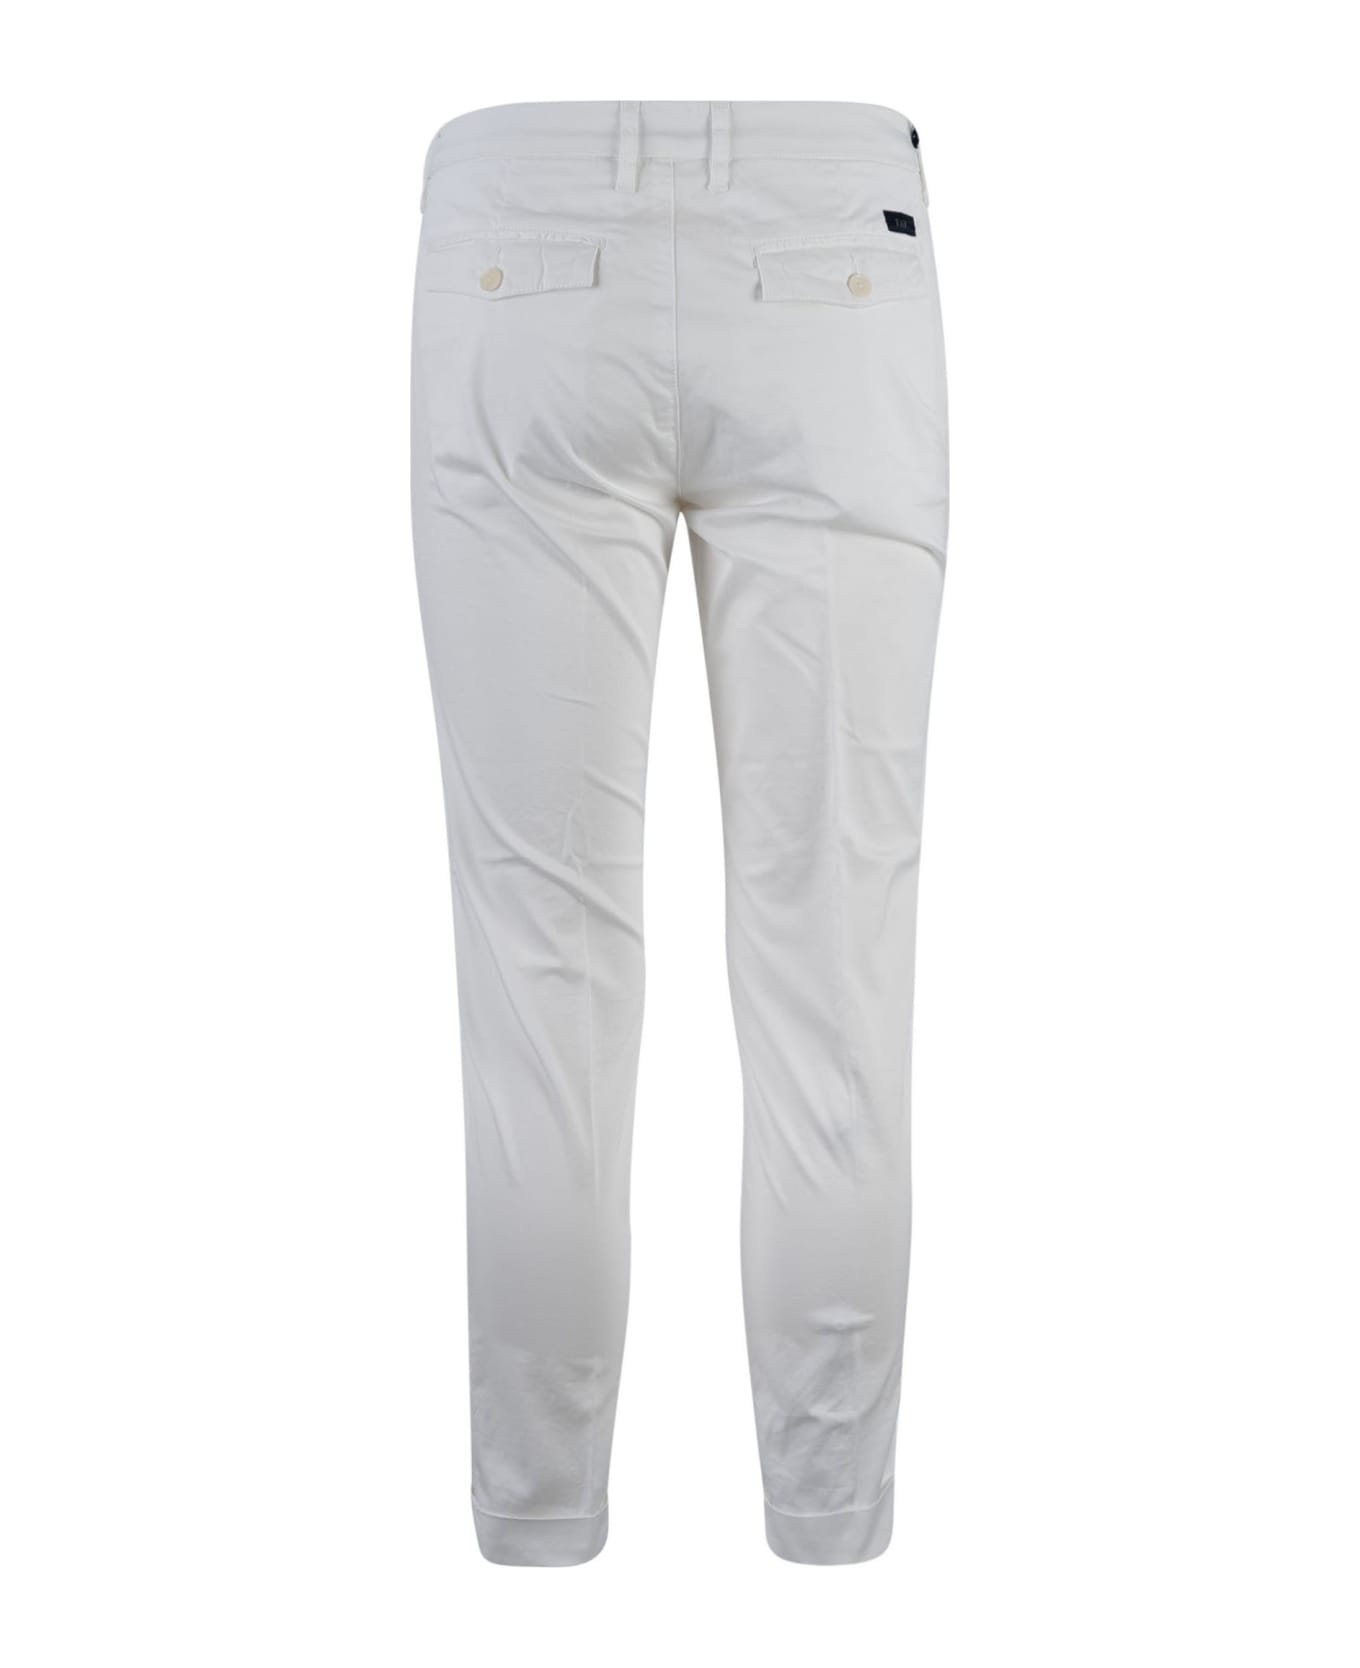 Fay Regular Fit Plain Trousers Fay - WHITE ボトムス